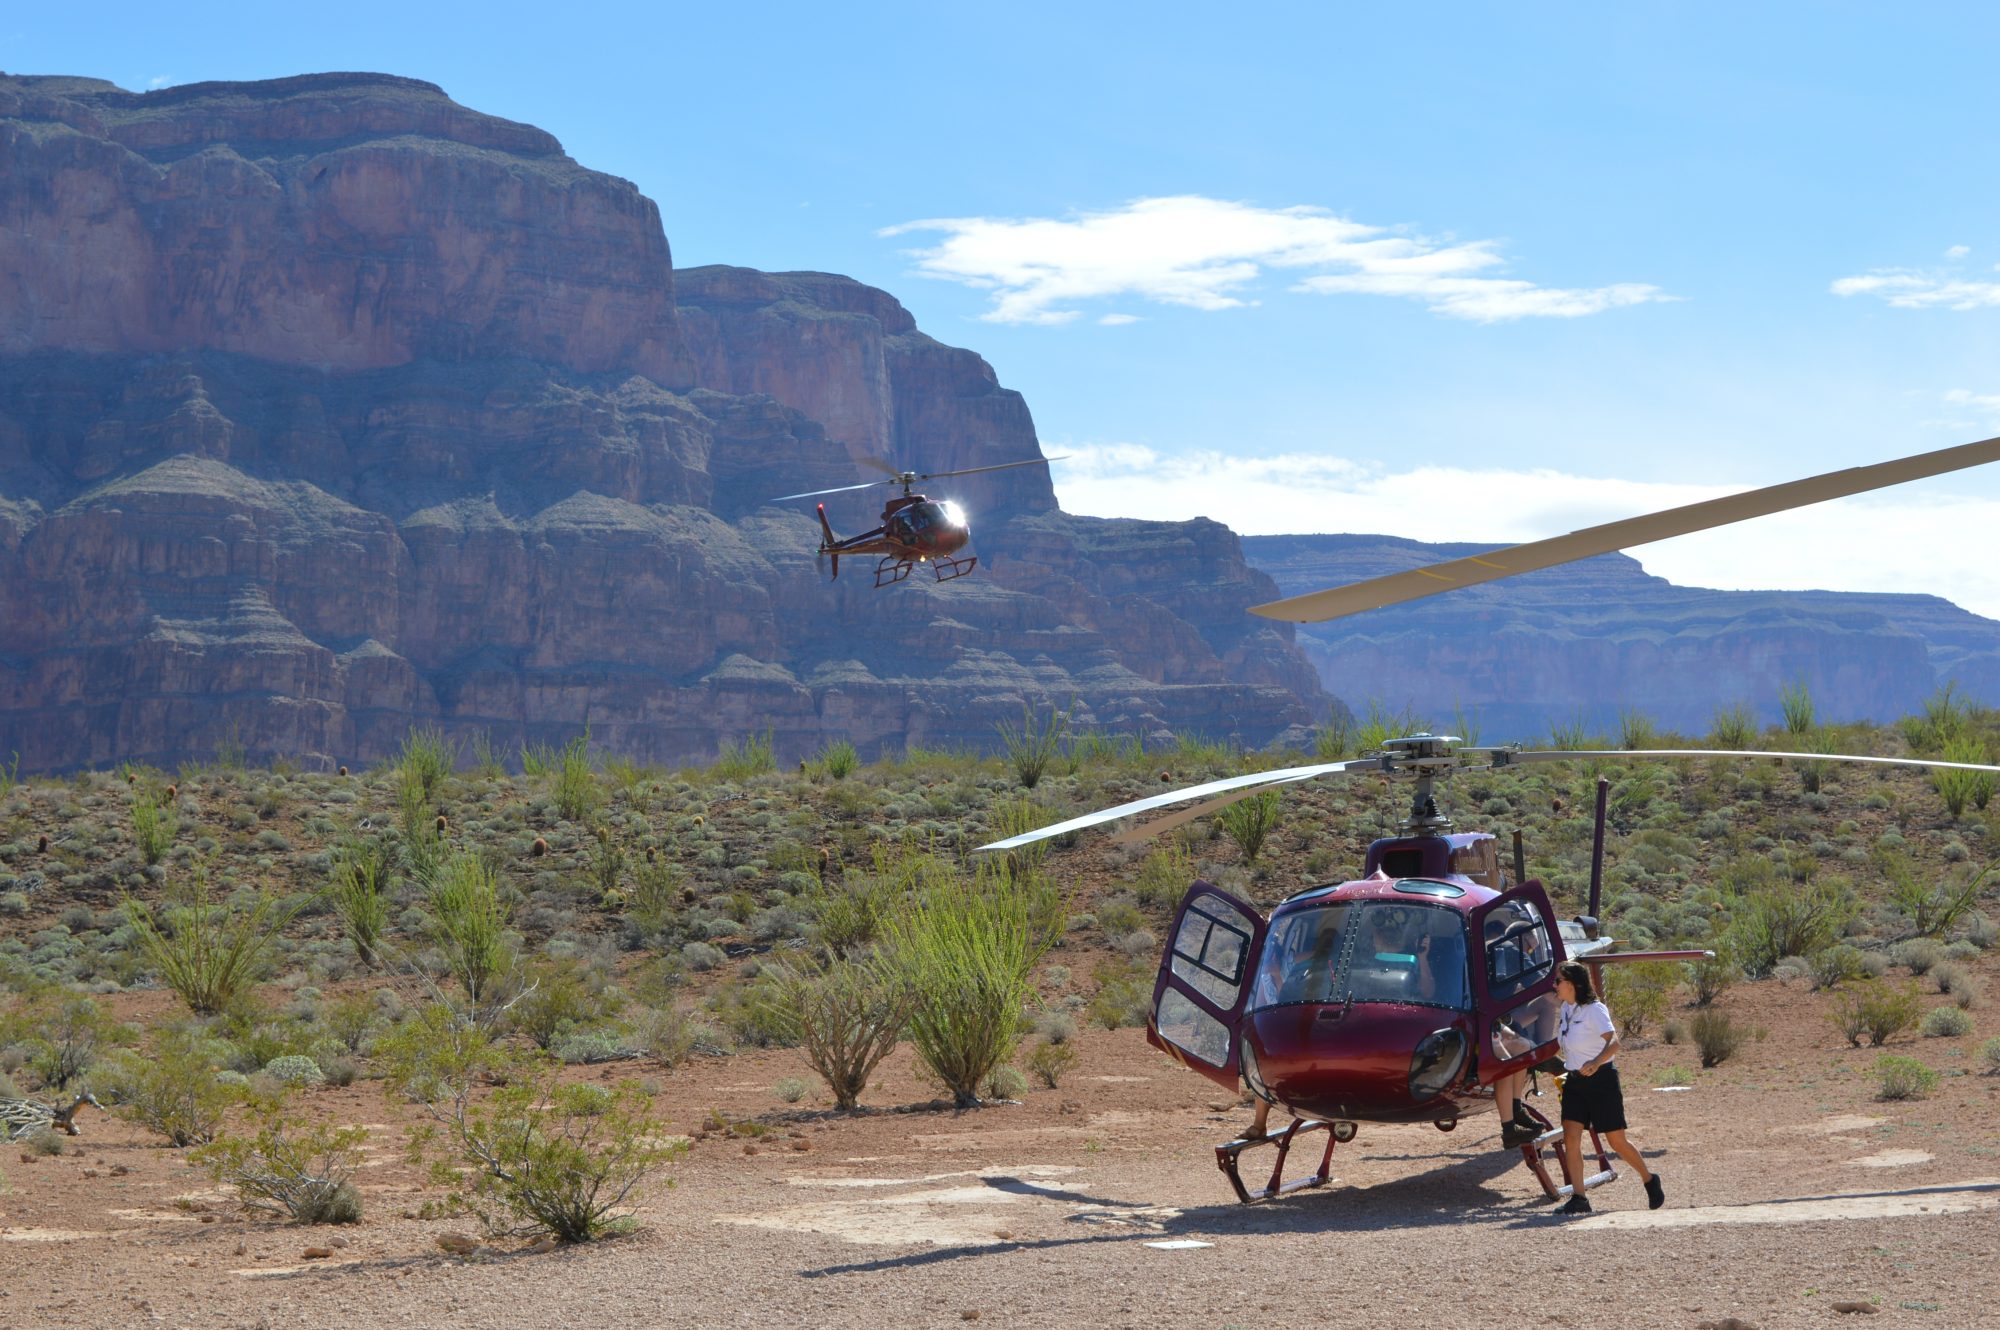 Helicopter Tour Of The Grand Canyon With Sundance Helicopters